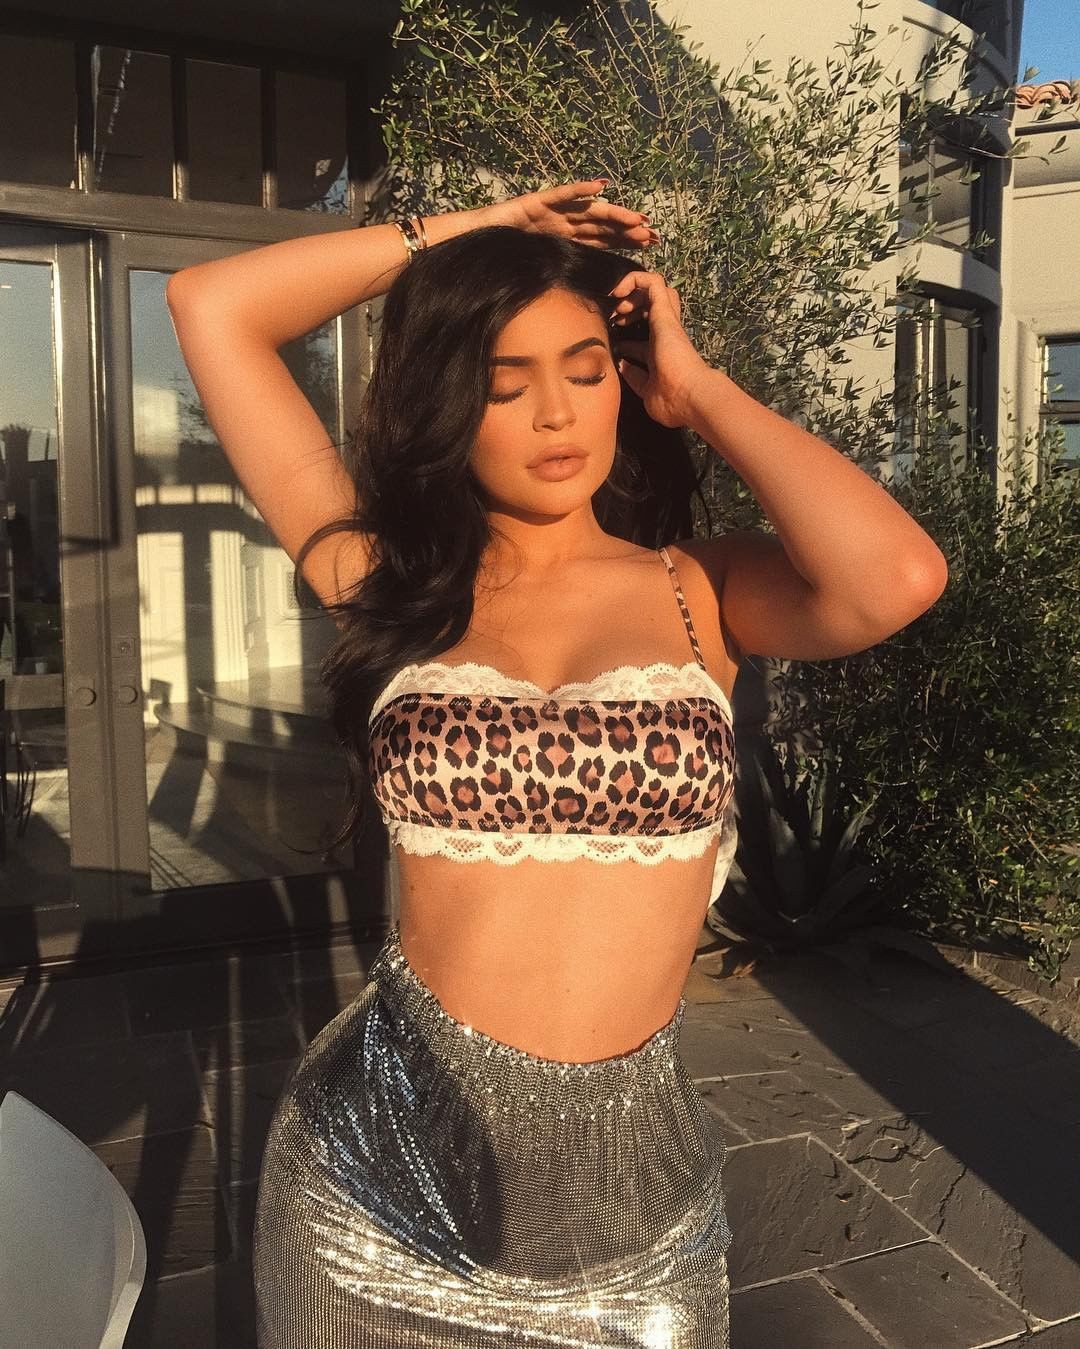 New Instagram Sexiest Kylie Jenner Pic: Kylie Jenner,  FASHION,  Instagram photos,  Stylevore,  Hot Instagram Models,  Vintage clothing,  luxury,  Vogue,  kylie jenner Fashion,  Cute kylie jenner,  instagram models,  kyliejenner,  haileybaldwin,  arianagrande  